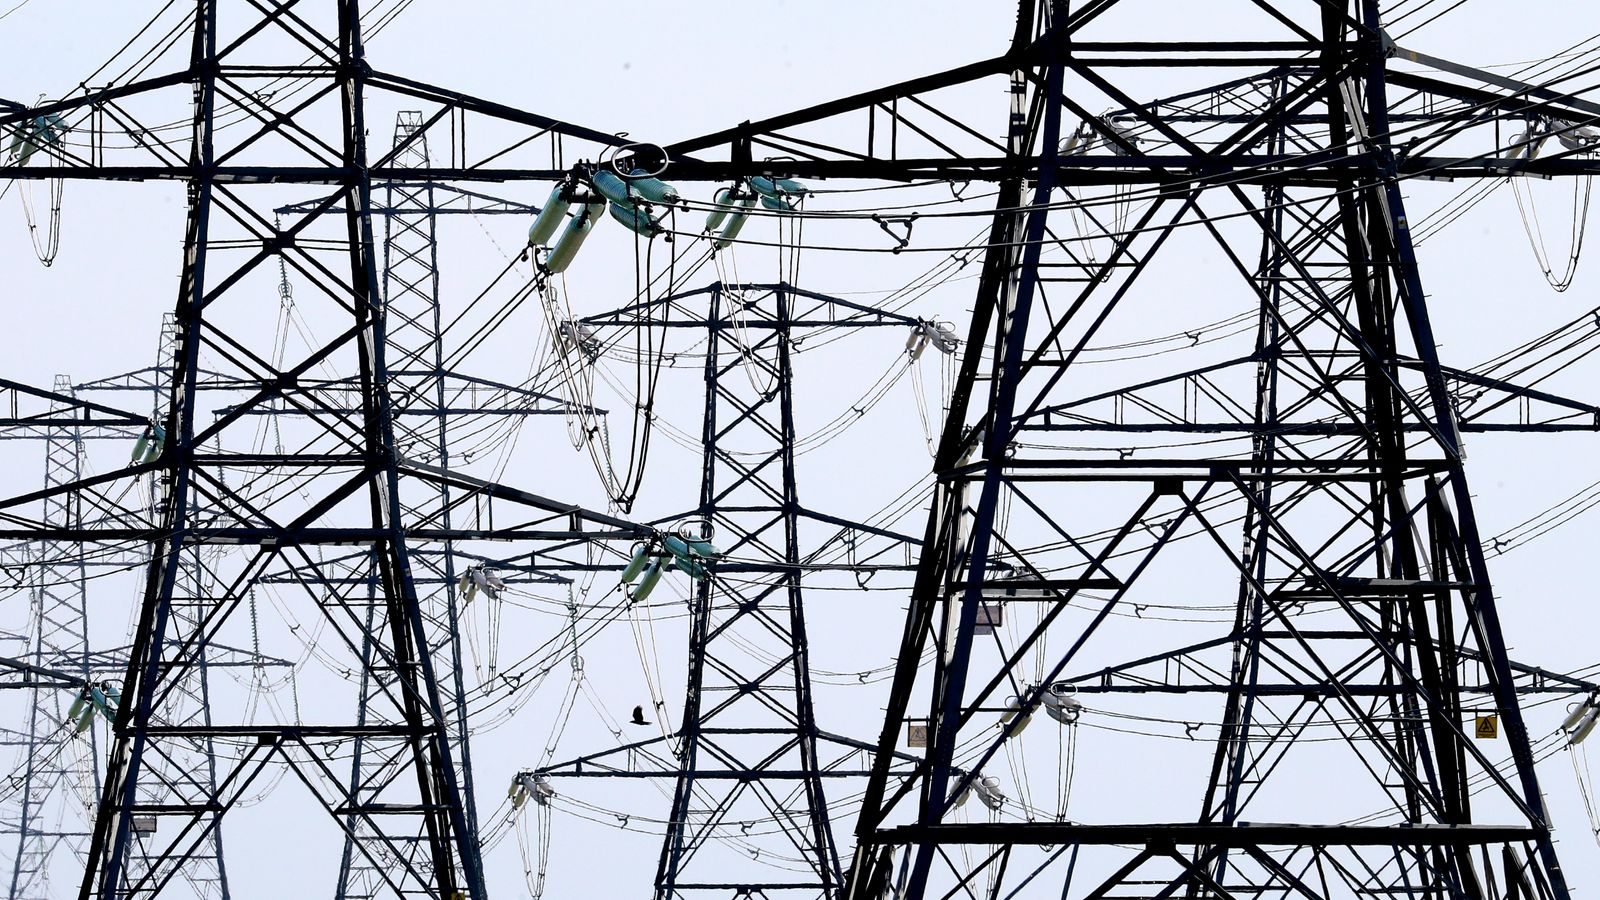 Winter power blackouts 'extremely unlikely' but UK must 'plan for every scenario', says minister